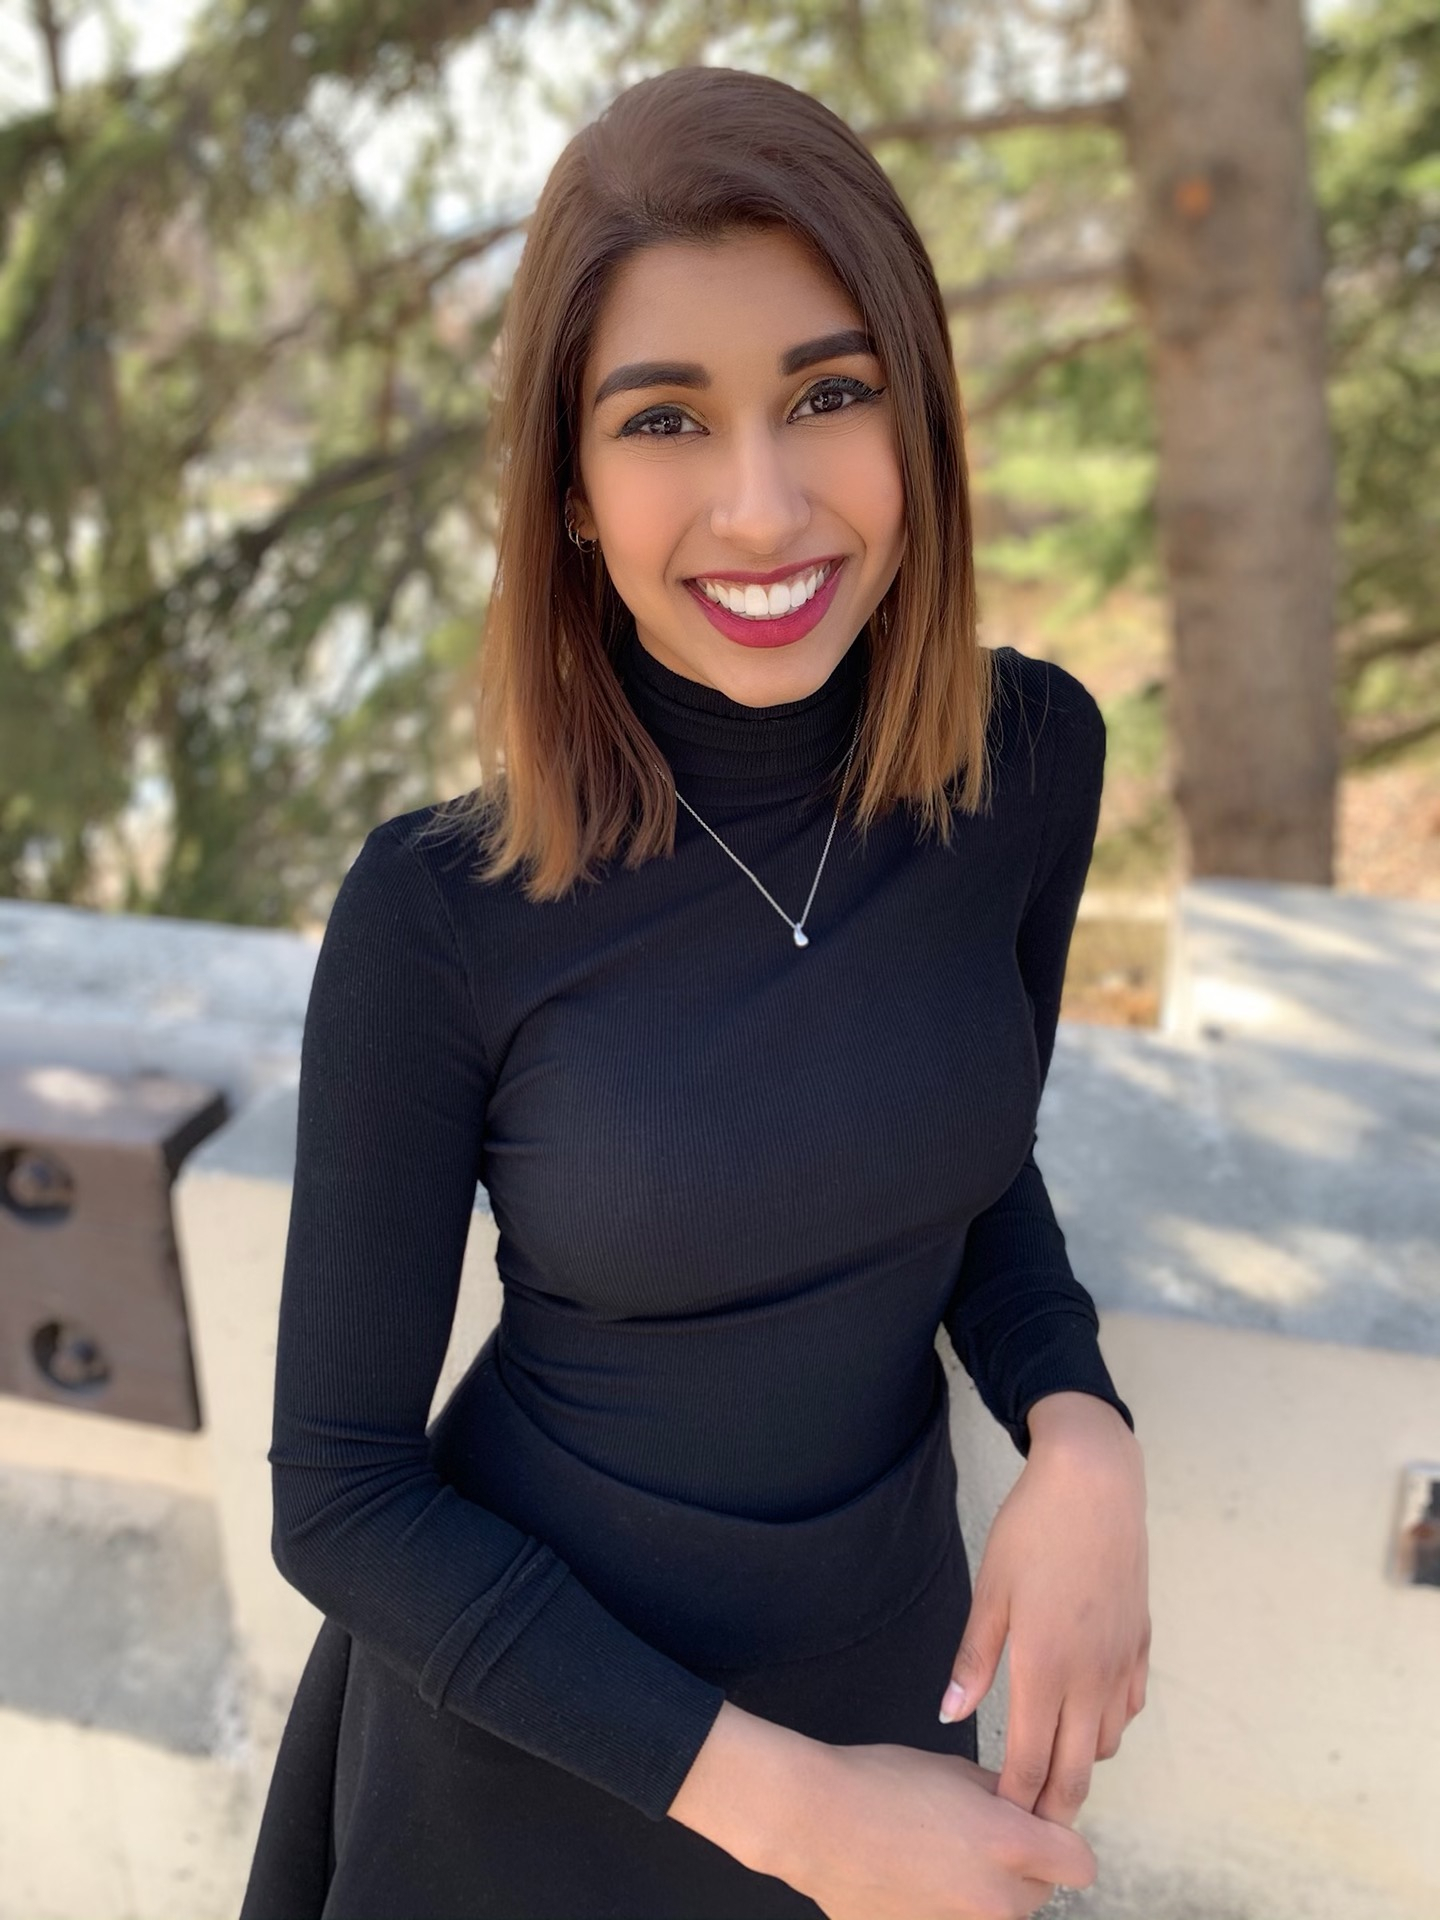 Civil engineering graduate Meghana Valupadas saw a need for change, and made it happen. She's co-founder of the Diversity in Engineering student group, creating a more inclusive environment for students.